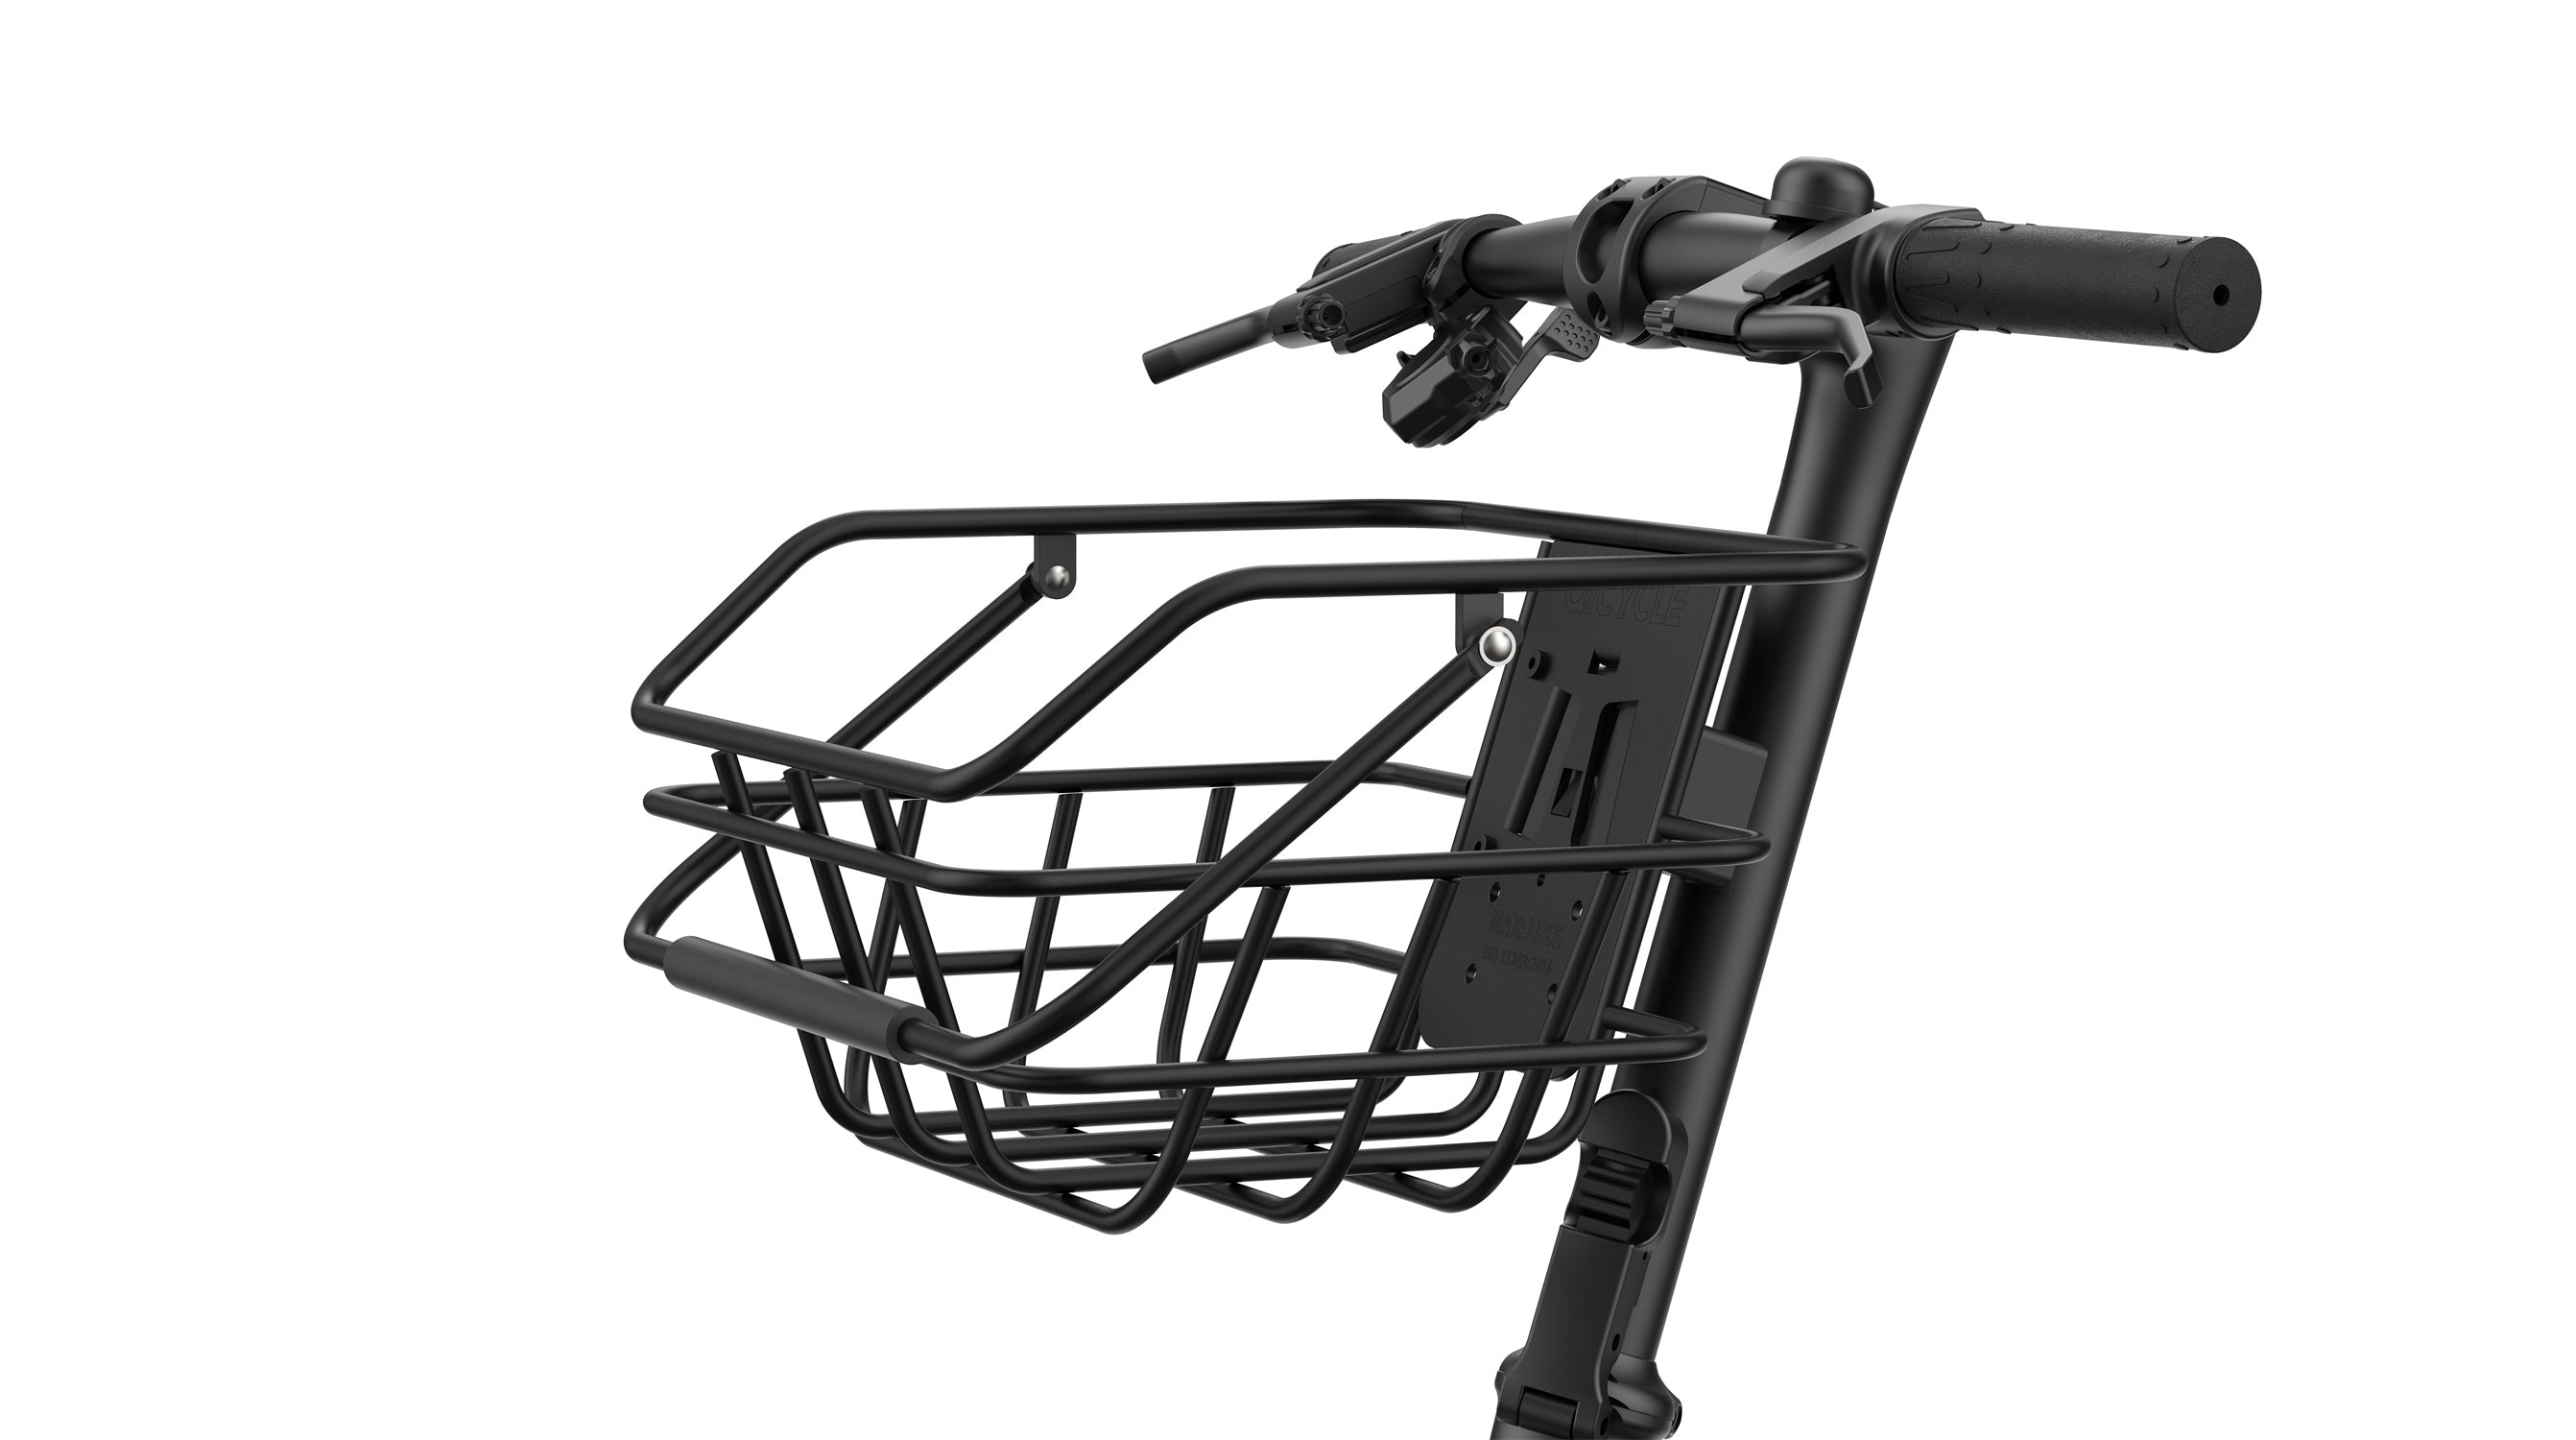 Front Bike Basket Applies for C2 E-BIKE Only